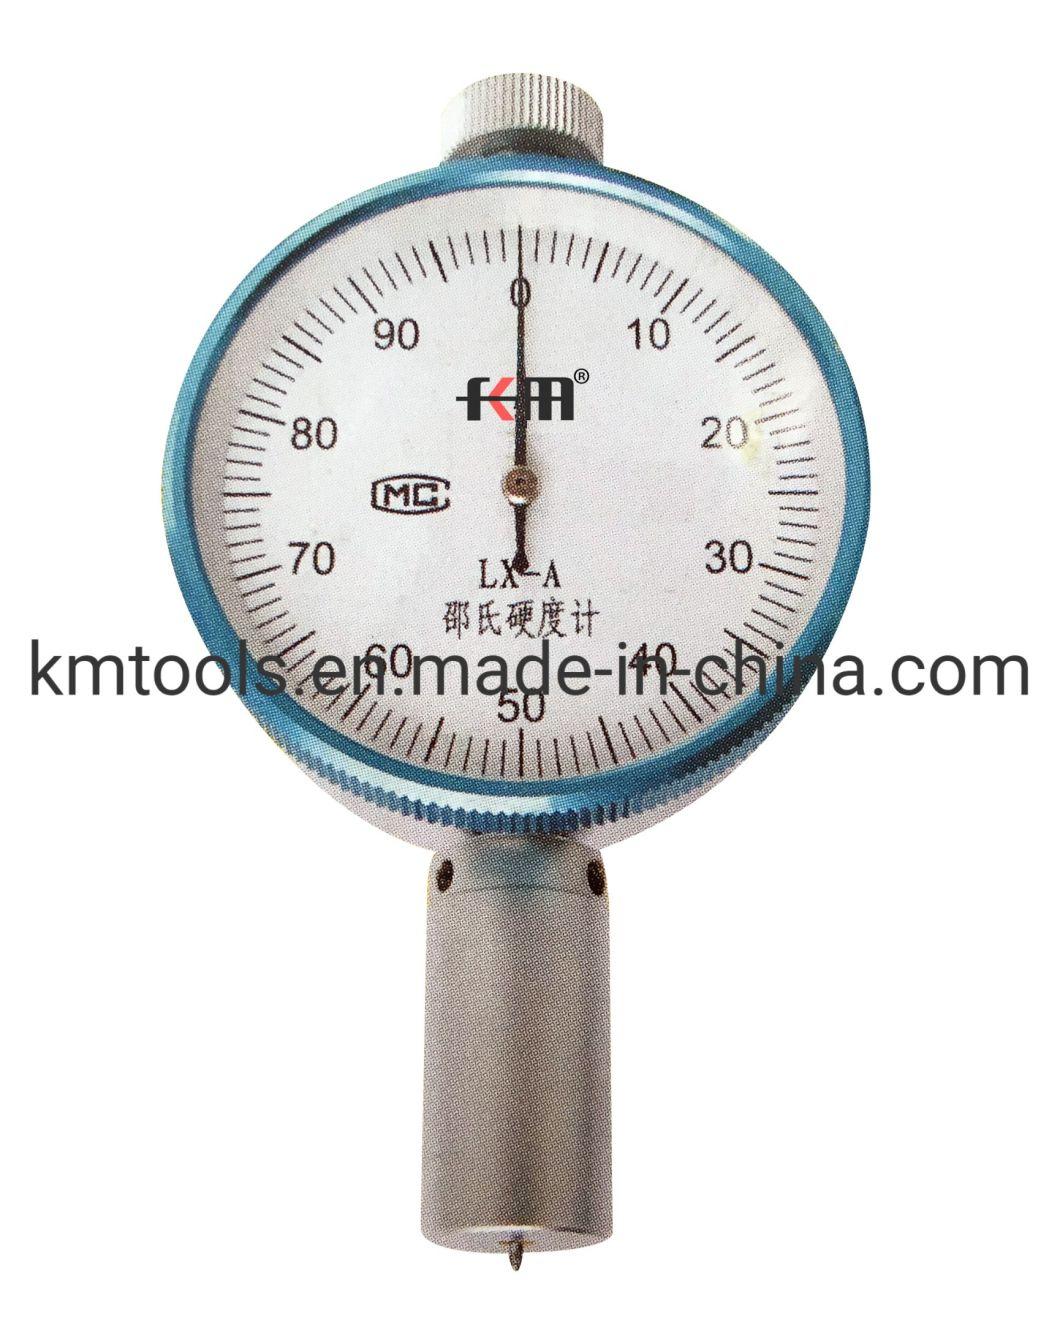 Shore a Durometer Hardness Tester to Test High Level Hardness Material